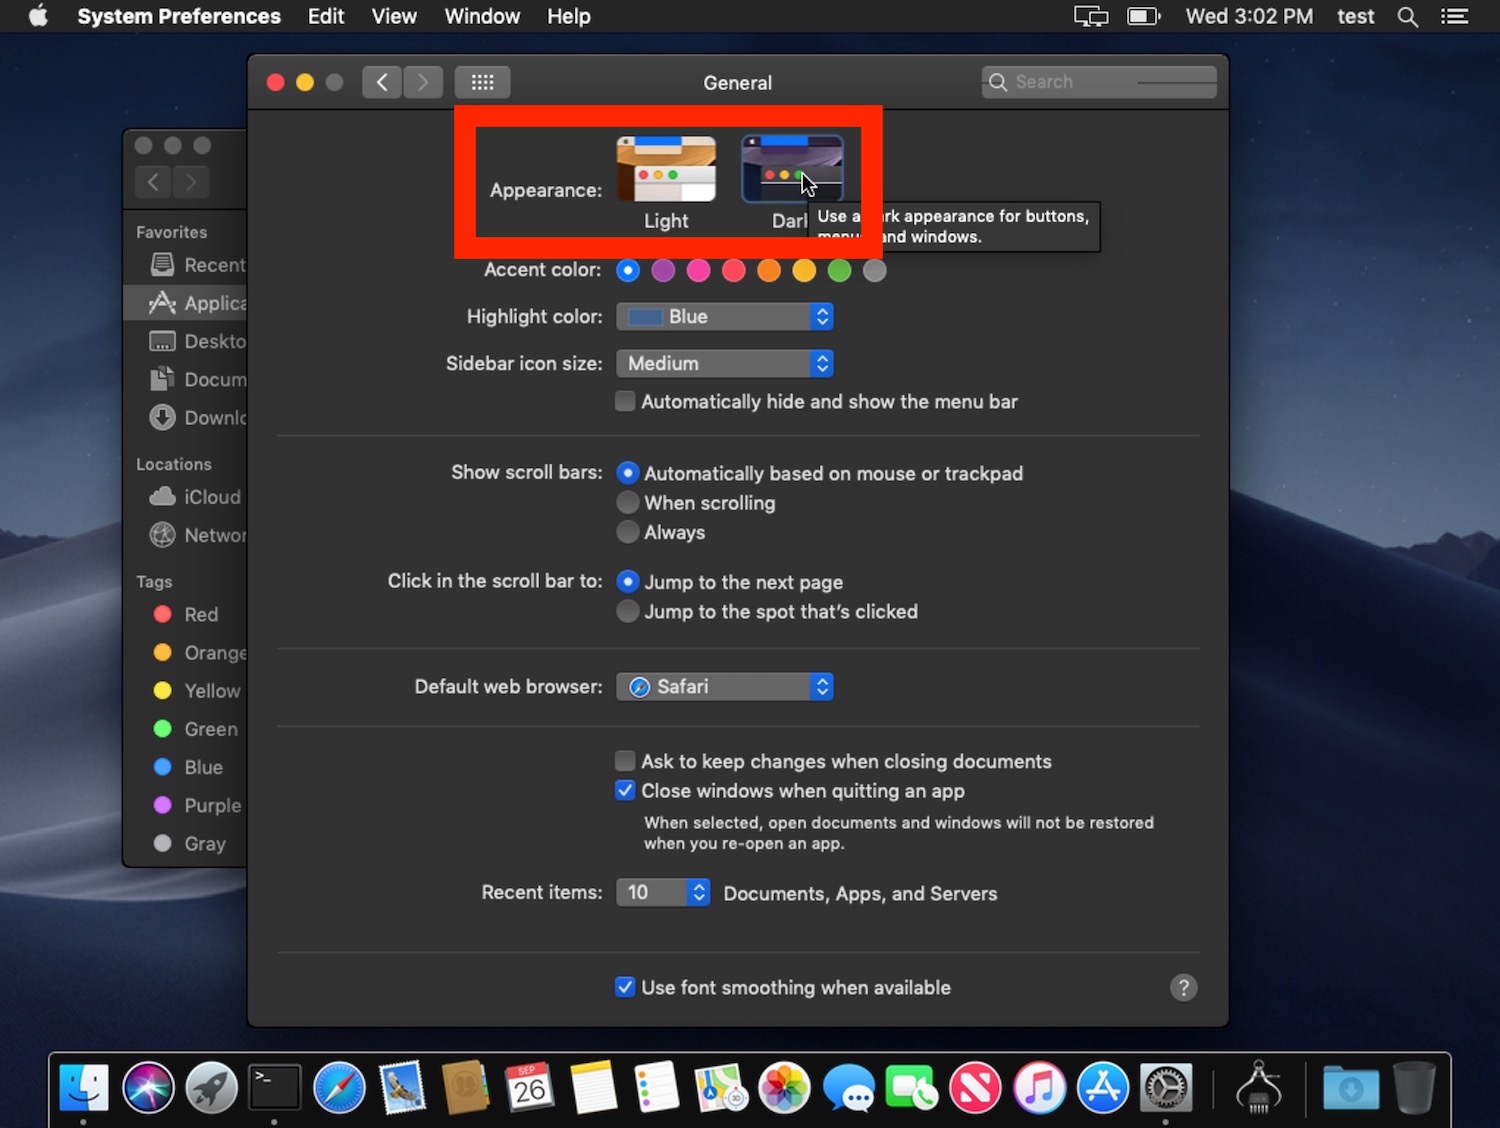 How to change to Dark theme in MacOS